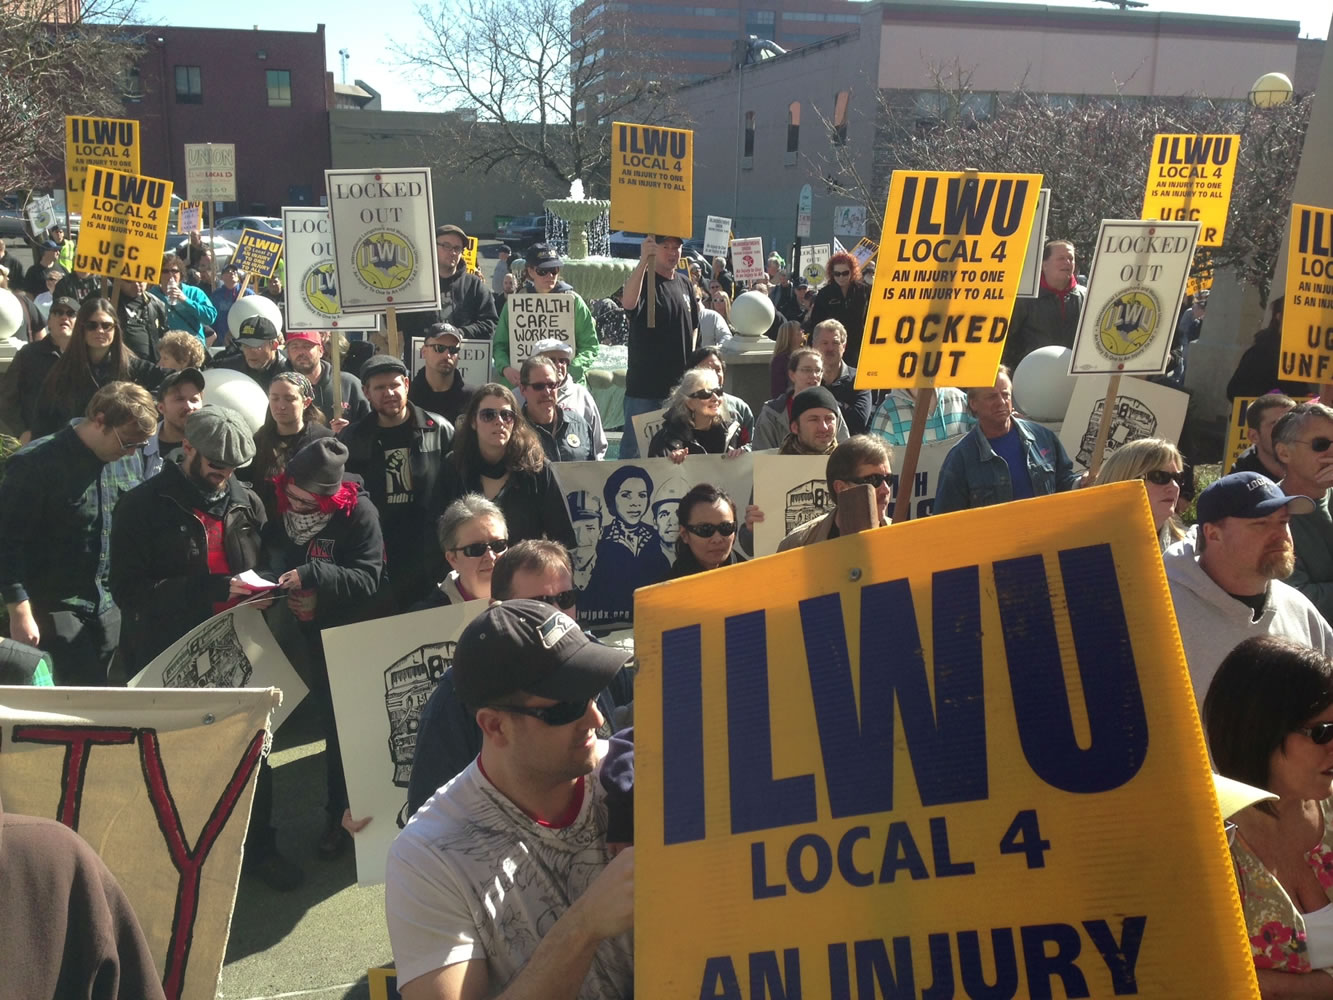 ILWU supporters converge on the downtown office of United Grain this morning.